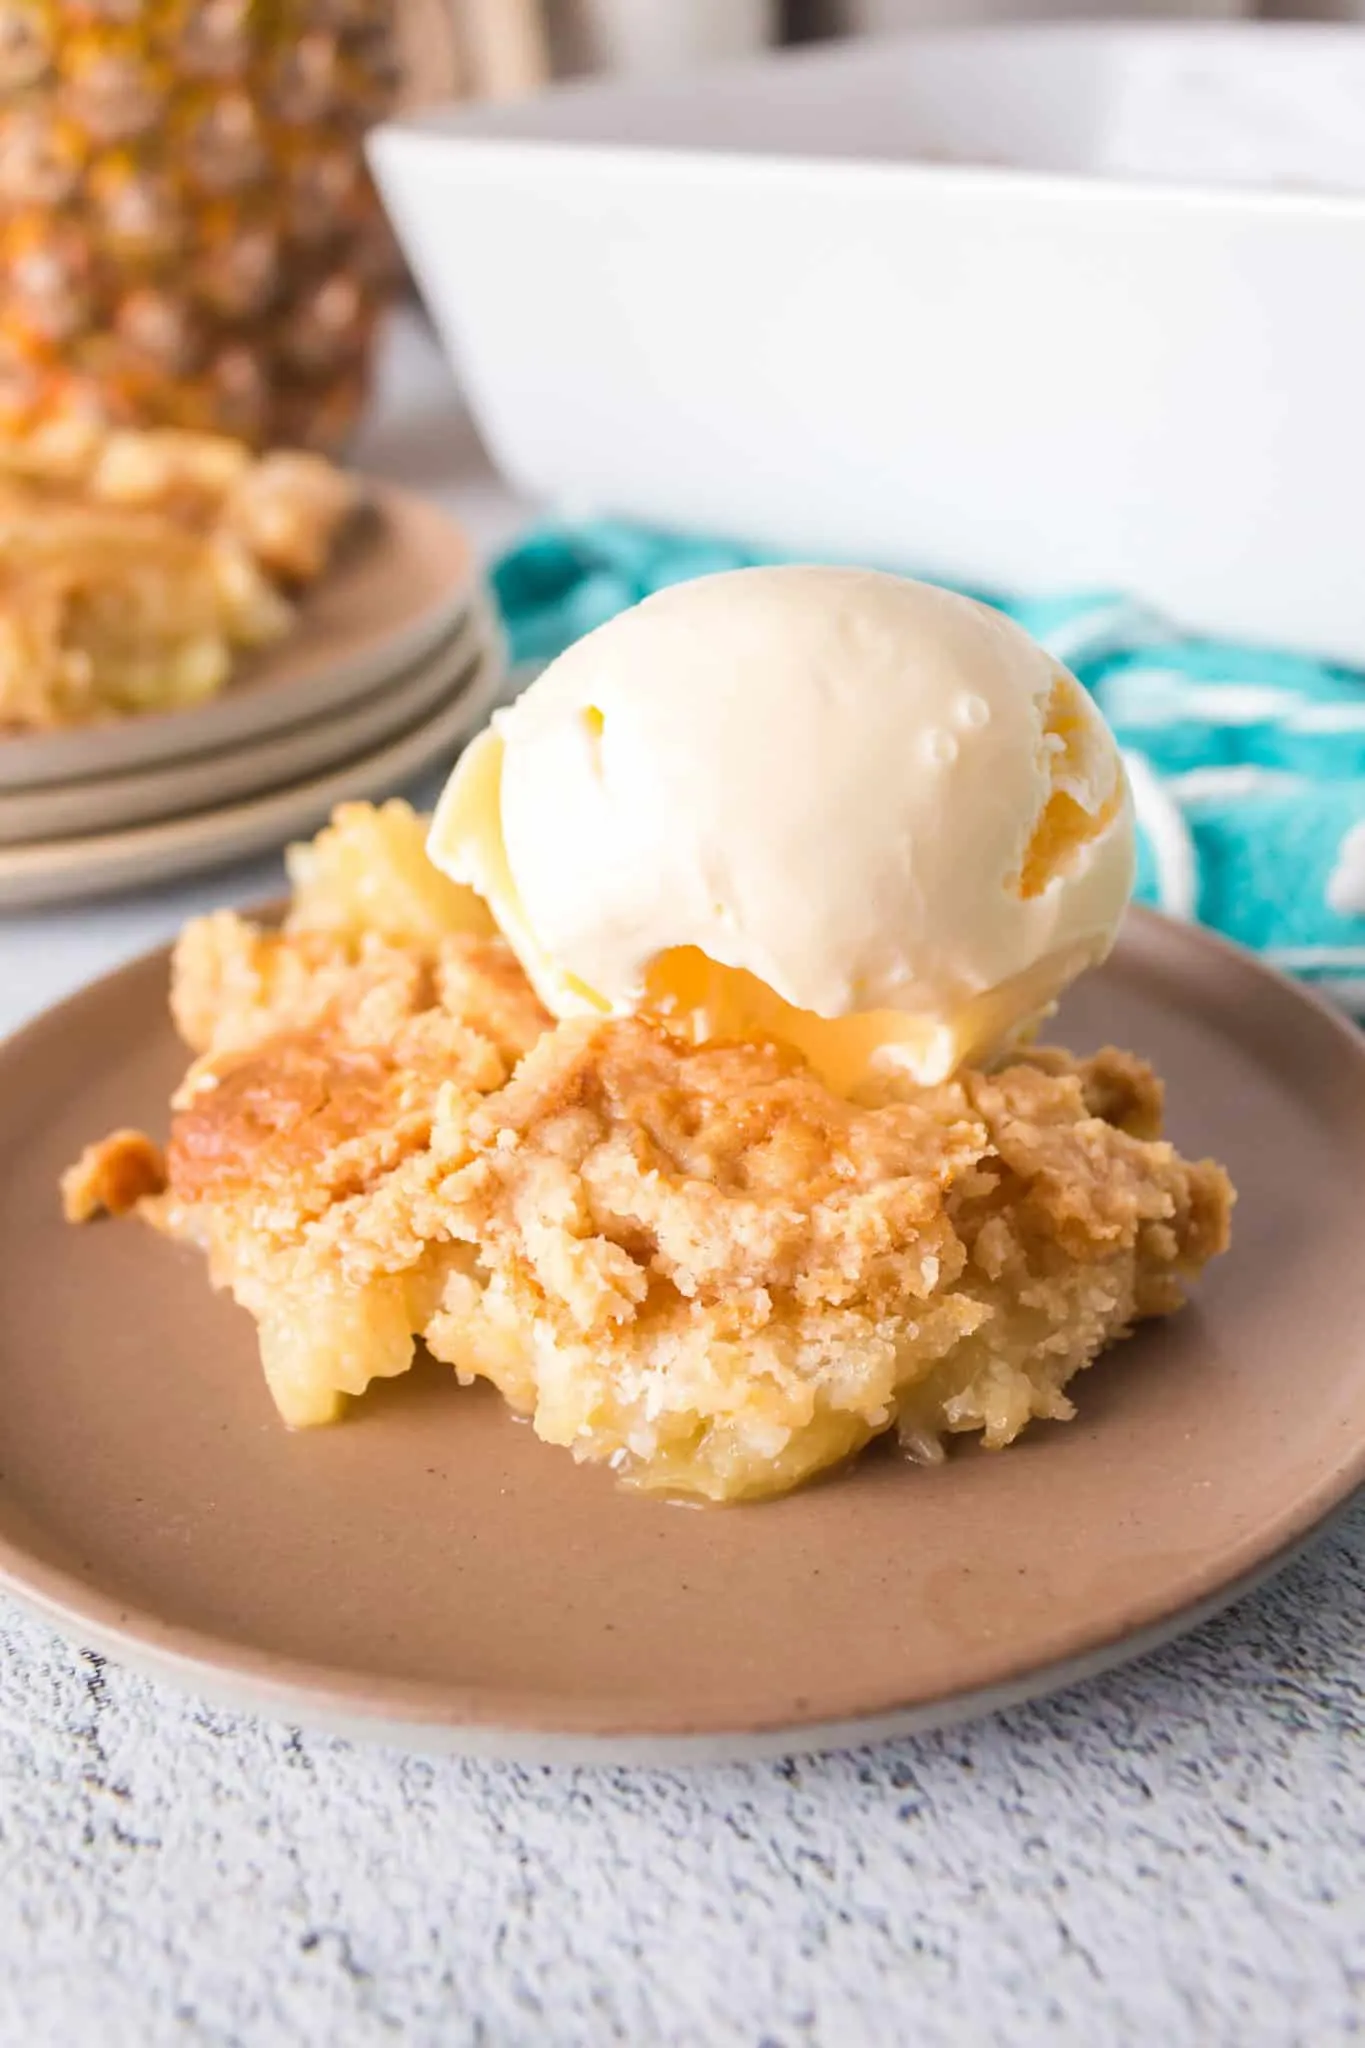 Pineapple Dump Cake is an easy dessert recipe using canned pineapple and boxed cake mix.